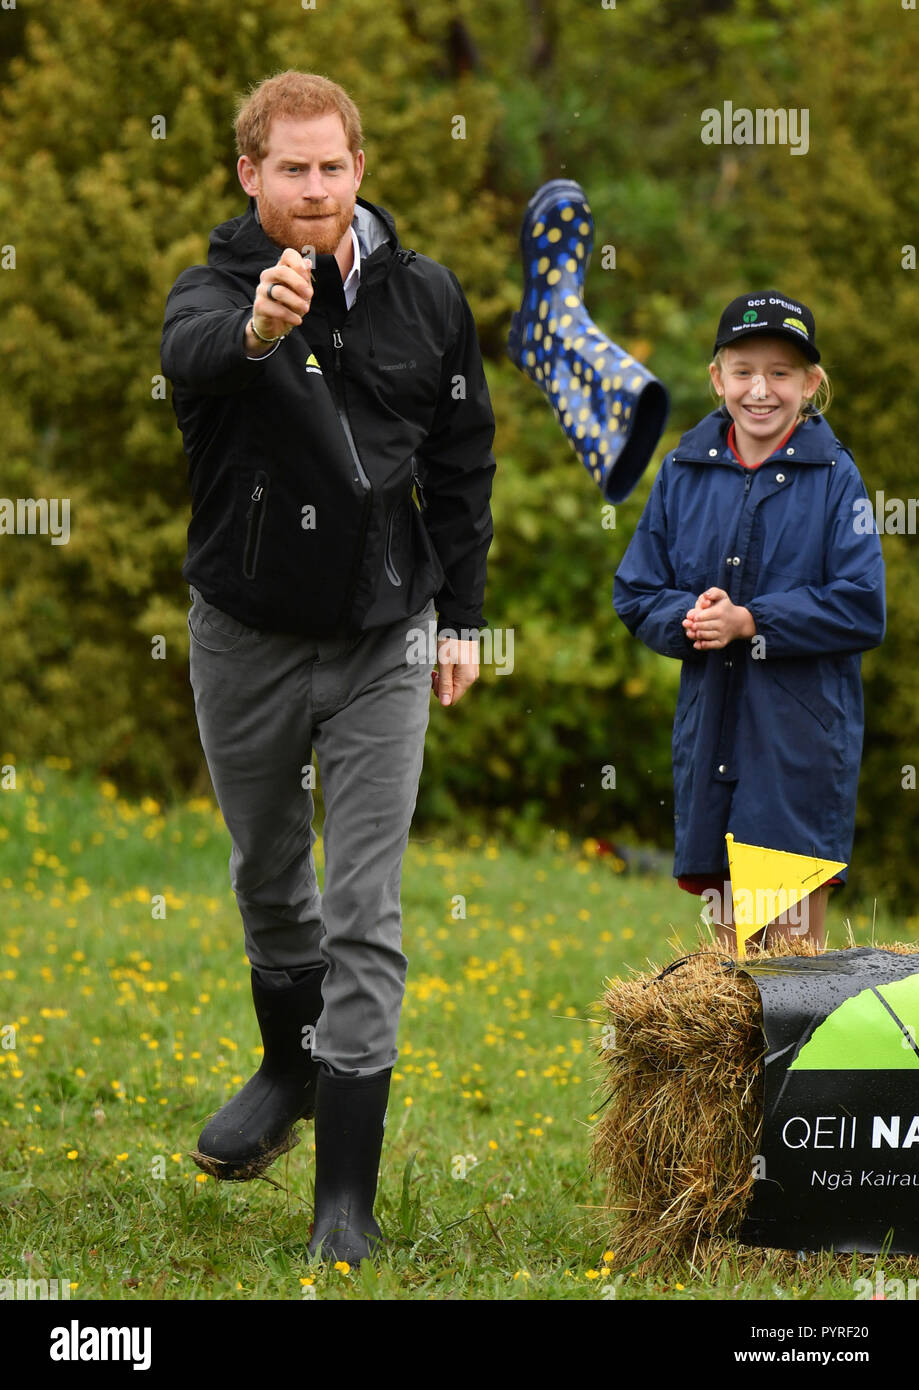 The Duke of Sussex, takes part in a 'welly wanging' contest during a visit to Redvale on Auckland's North Shore to dedicate a 20-hectare area of native bush to the Queen's Commonwealth Canopy, New Zealand. Stock Photo